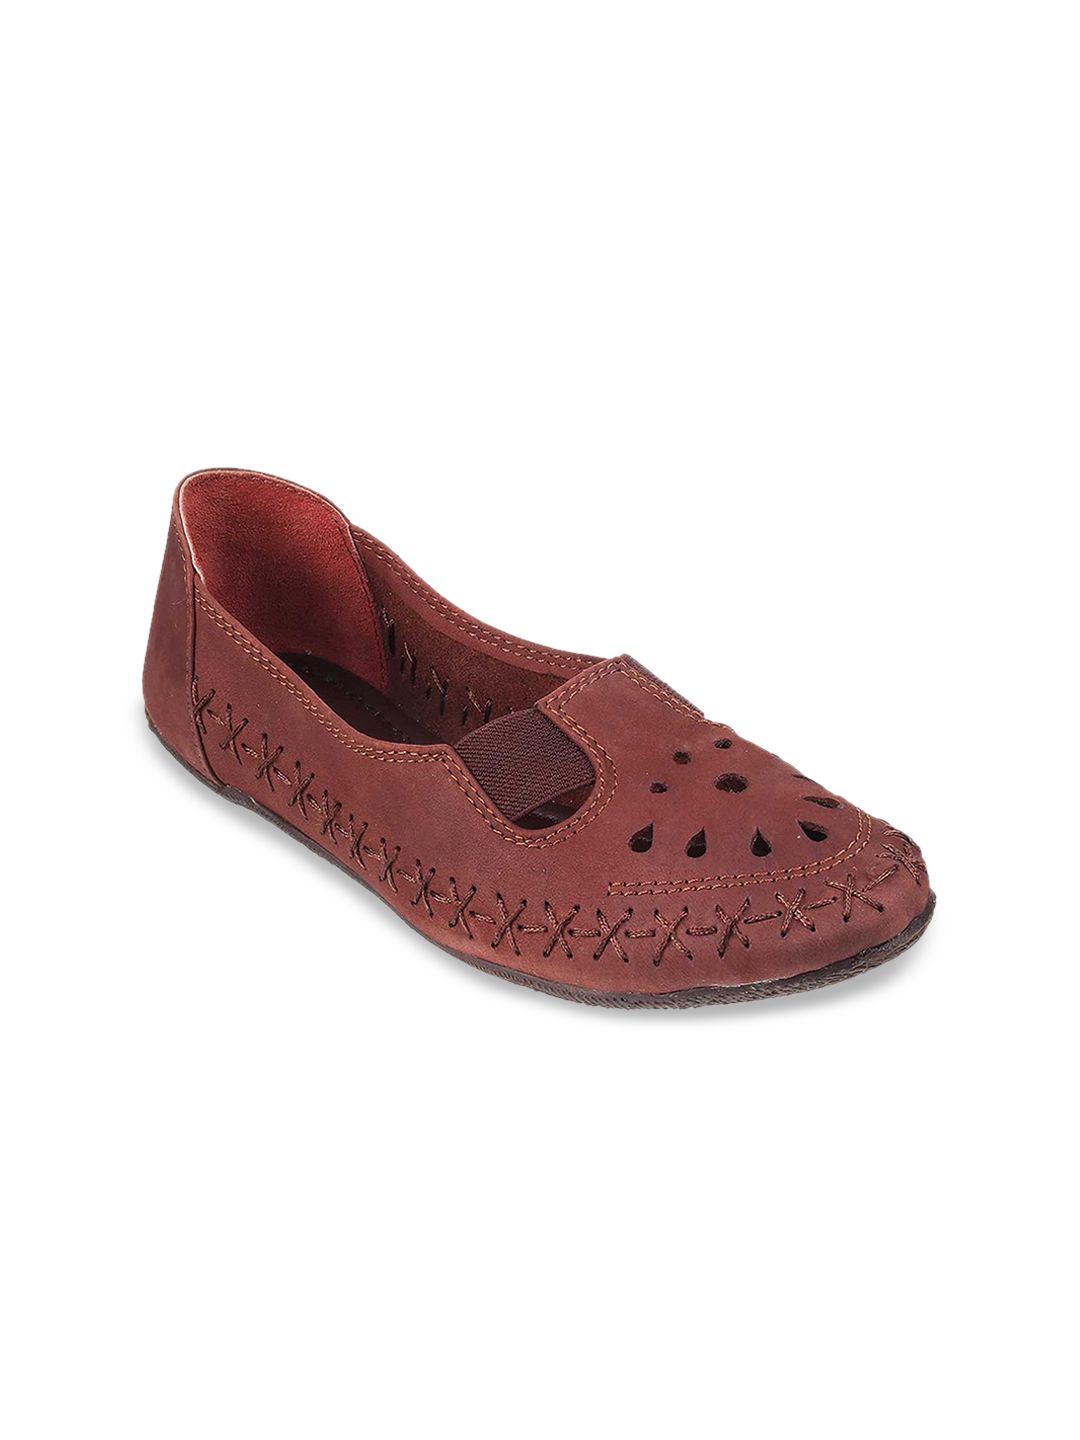 Metro Women Brown Woven Design Ballerinas with Laser Cuts Price in India